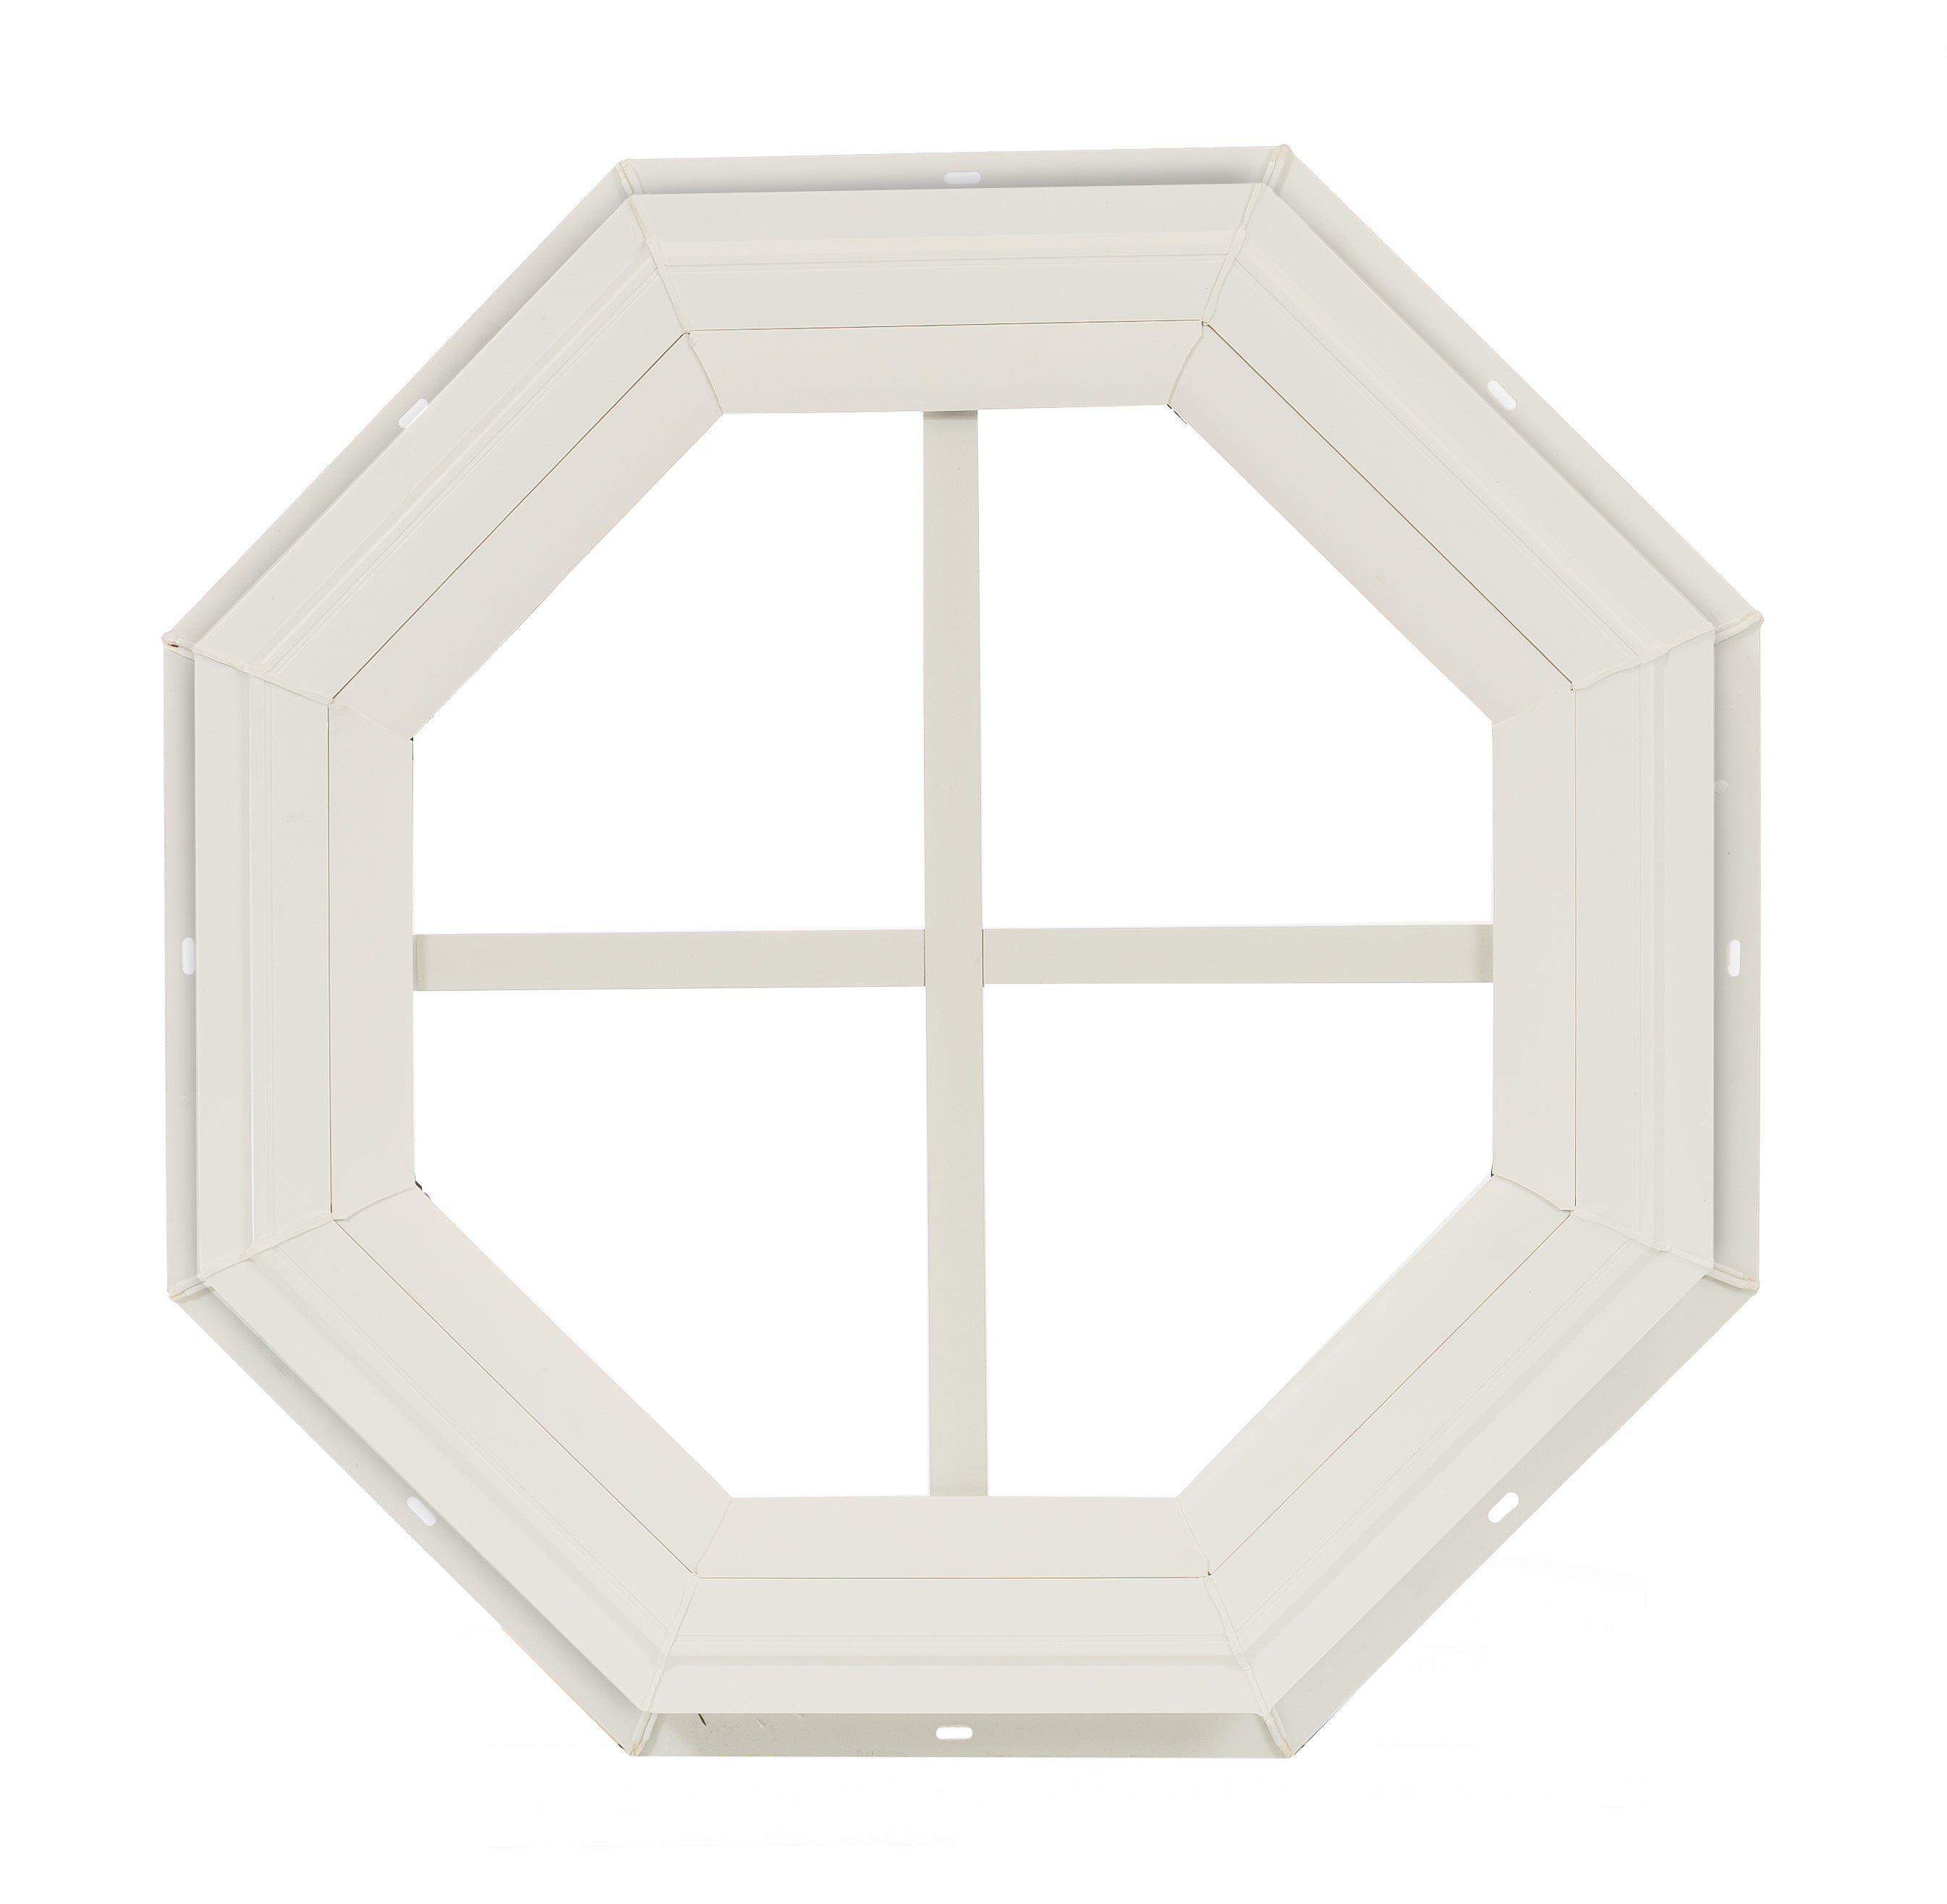 14" Octagon Gable J-Lap Mount PVC Window for Sheds, Playhouses, and MORE